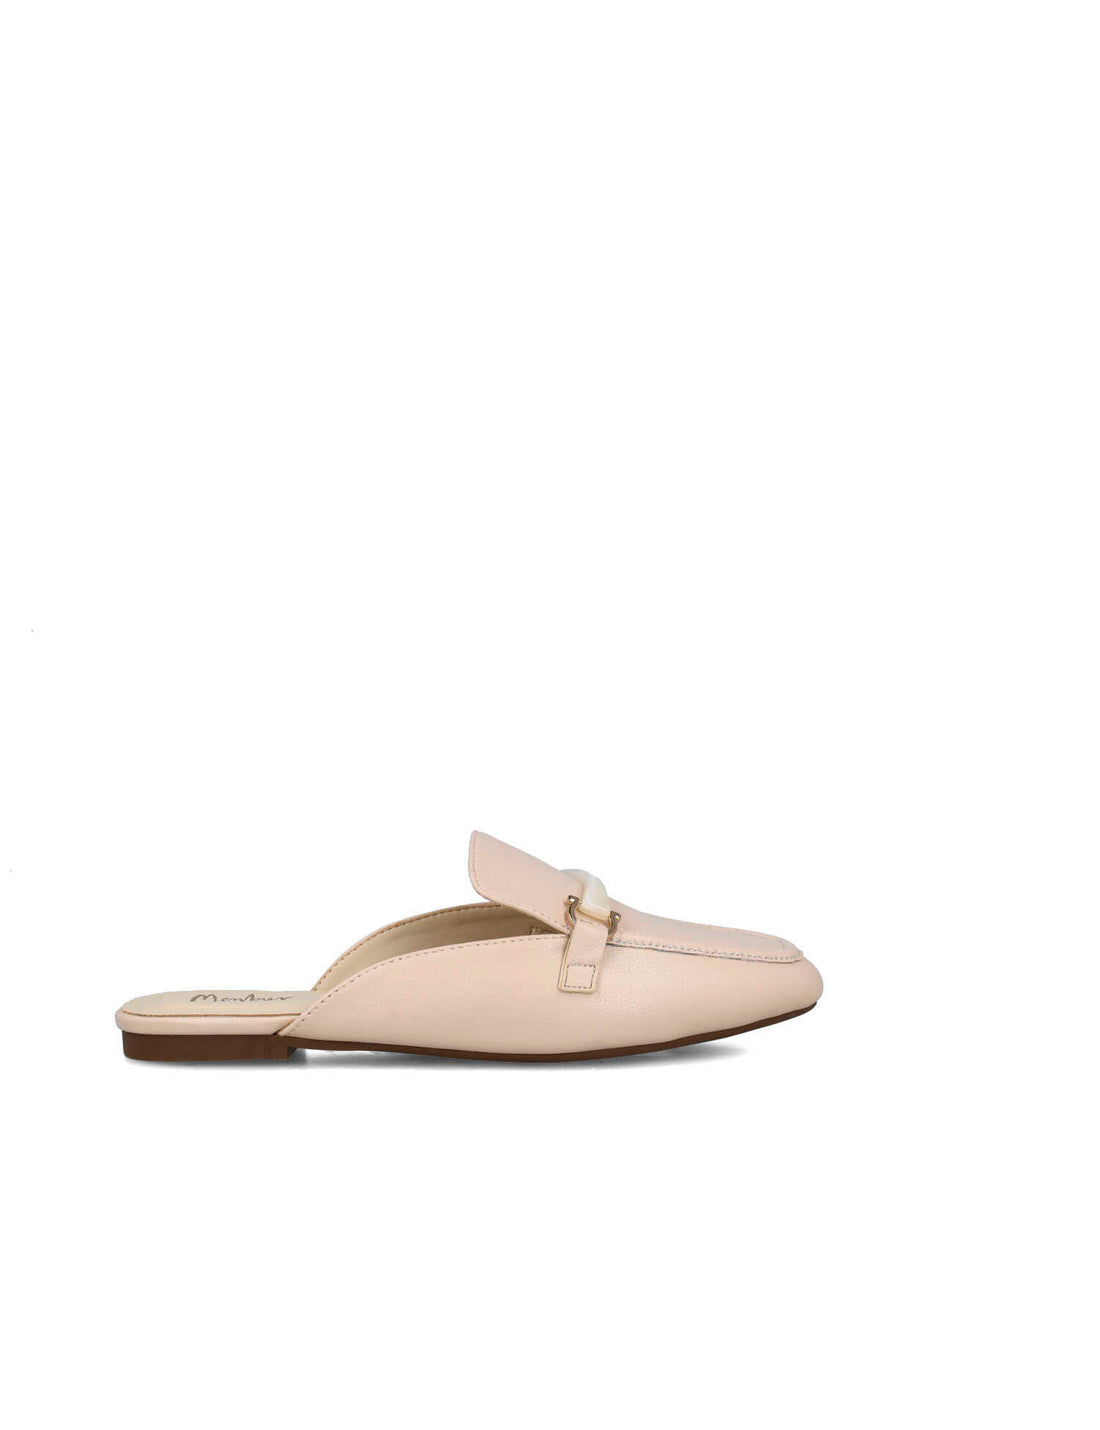 Beige Slipper Mules With Gold Hardware_25560_06_01